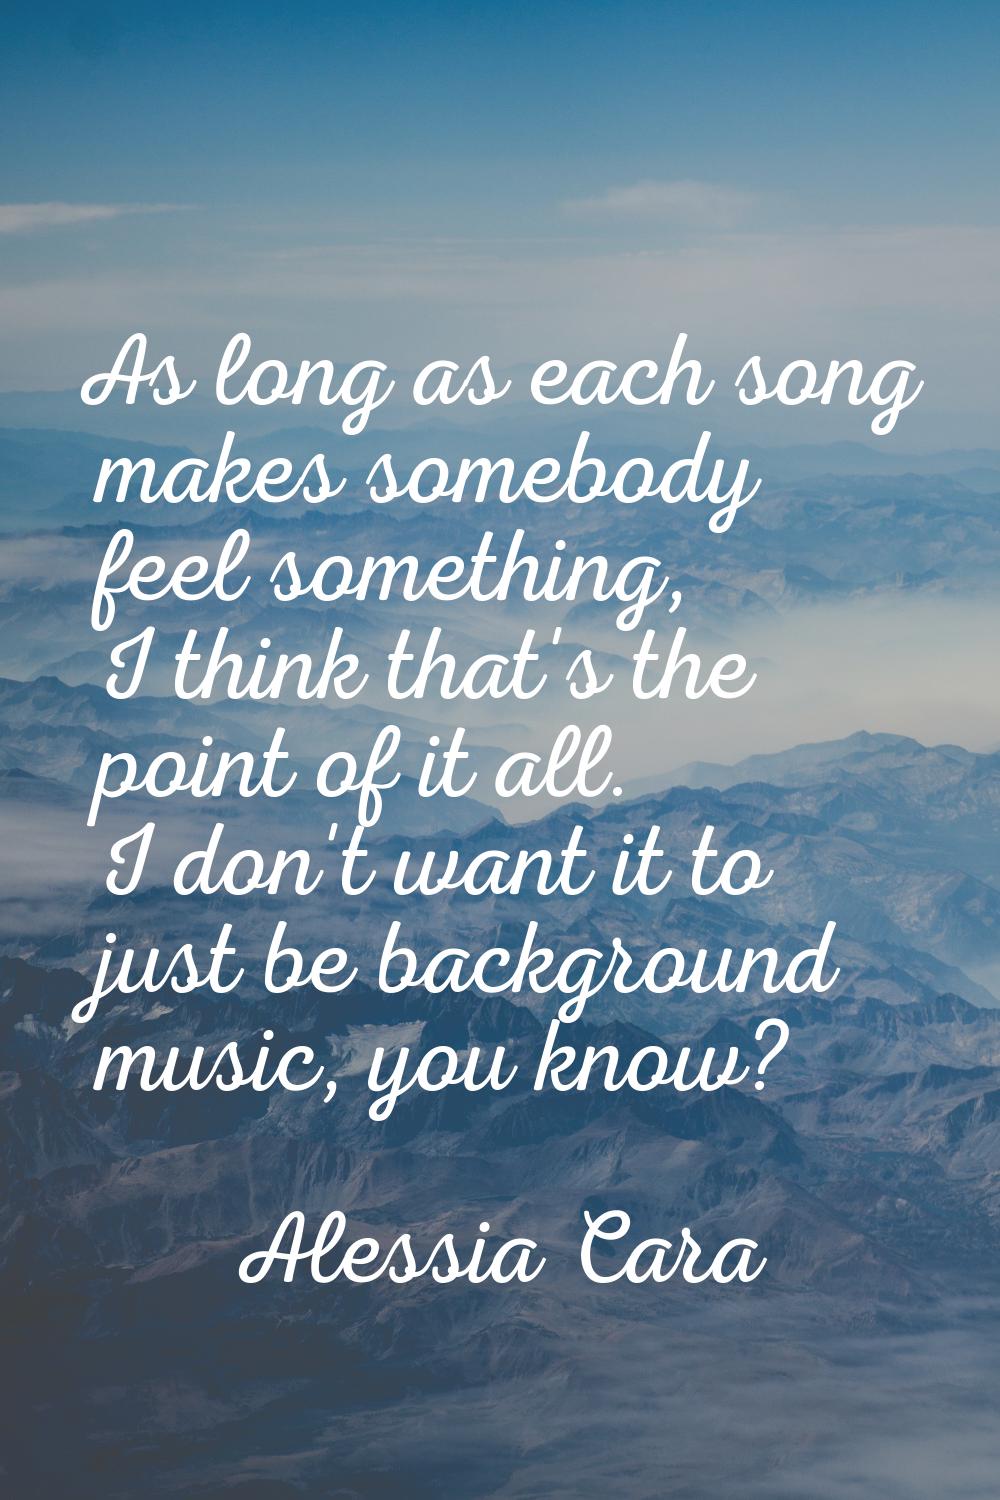 As long as each song makes somebody feel something, I think that's the point of it all. I don't wan